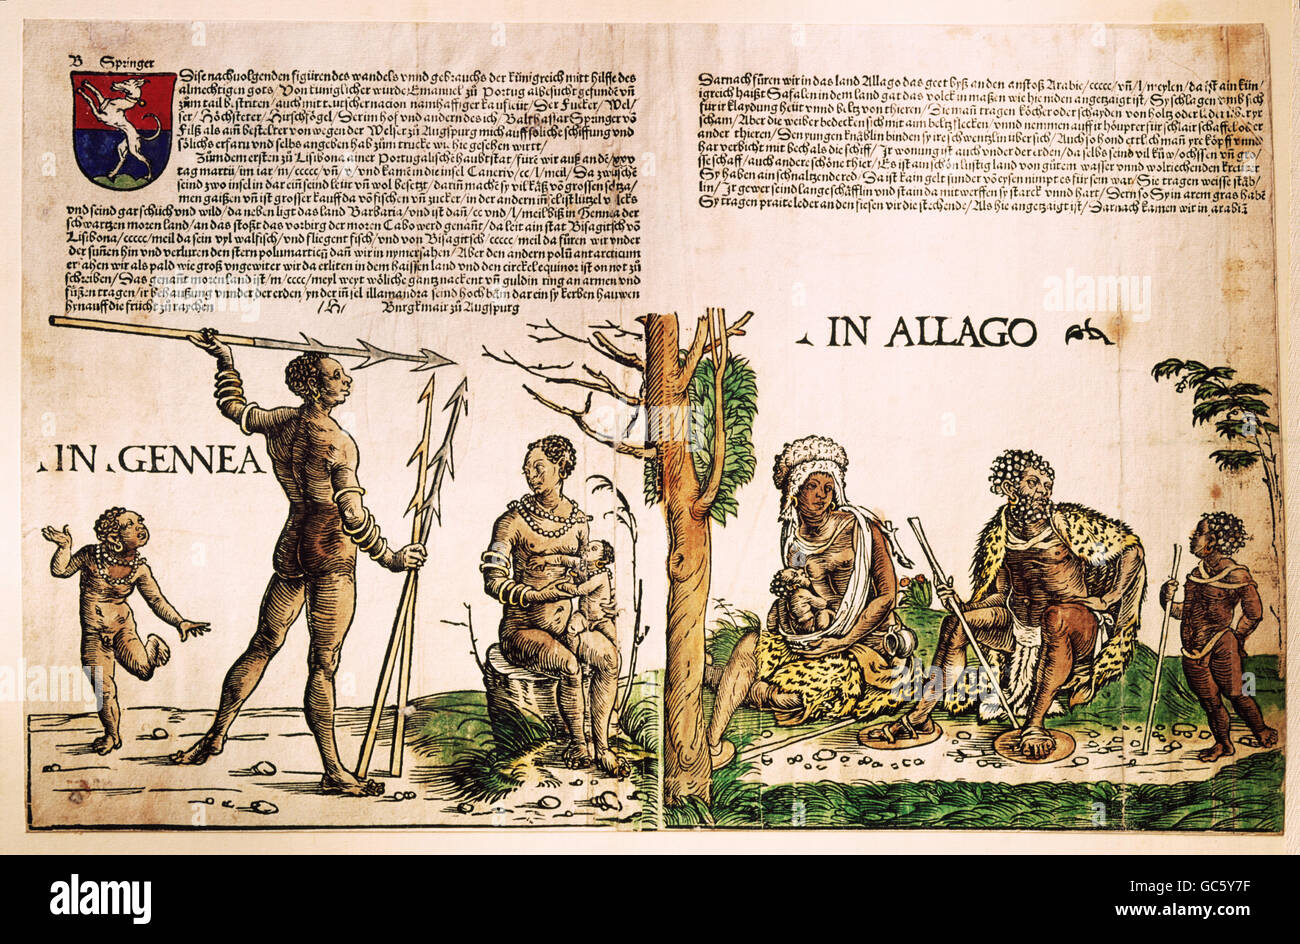 people, ethnics, Africa, Guinea and Allago, woodcut by Hans Burgkmair the Elder (1473 - 1531), Welser chronicle, Venezuela expedition, sheet 1, Additional-Rights-Clearences-Not Available Stock Photo